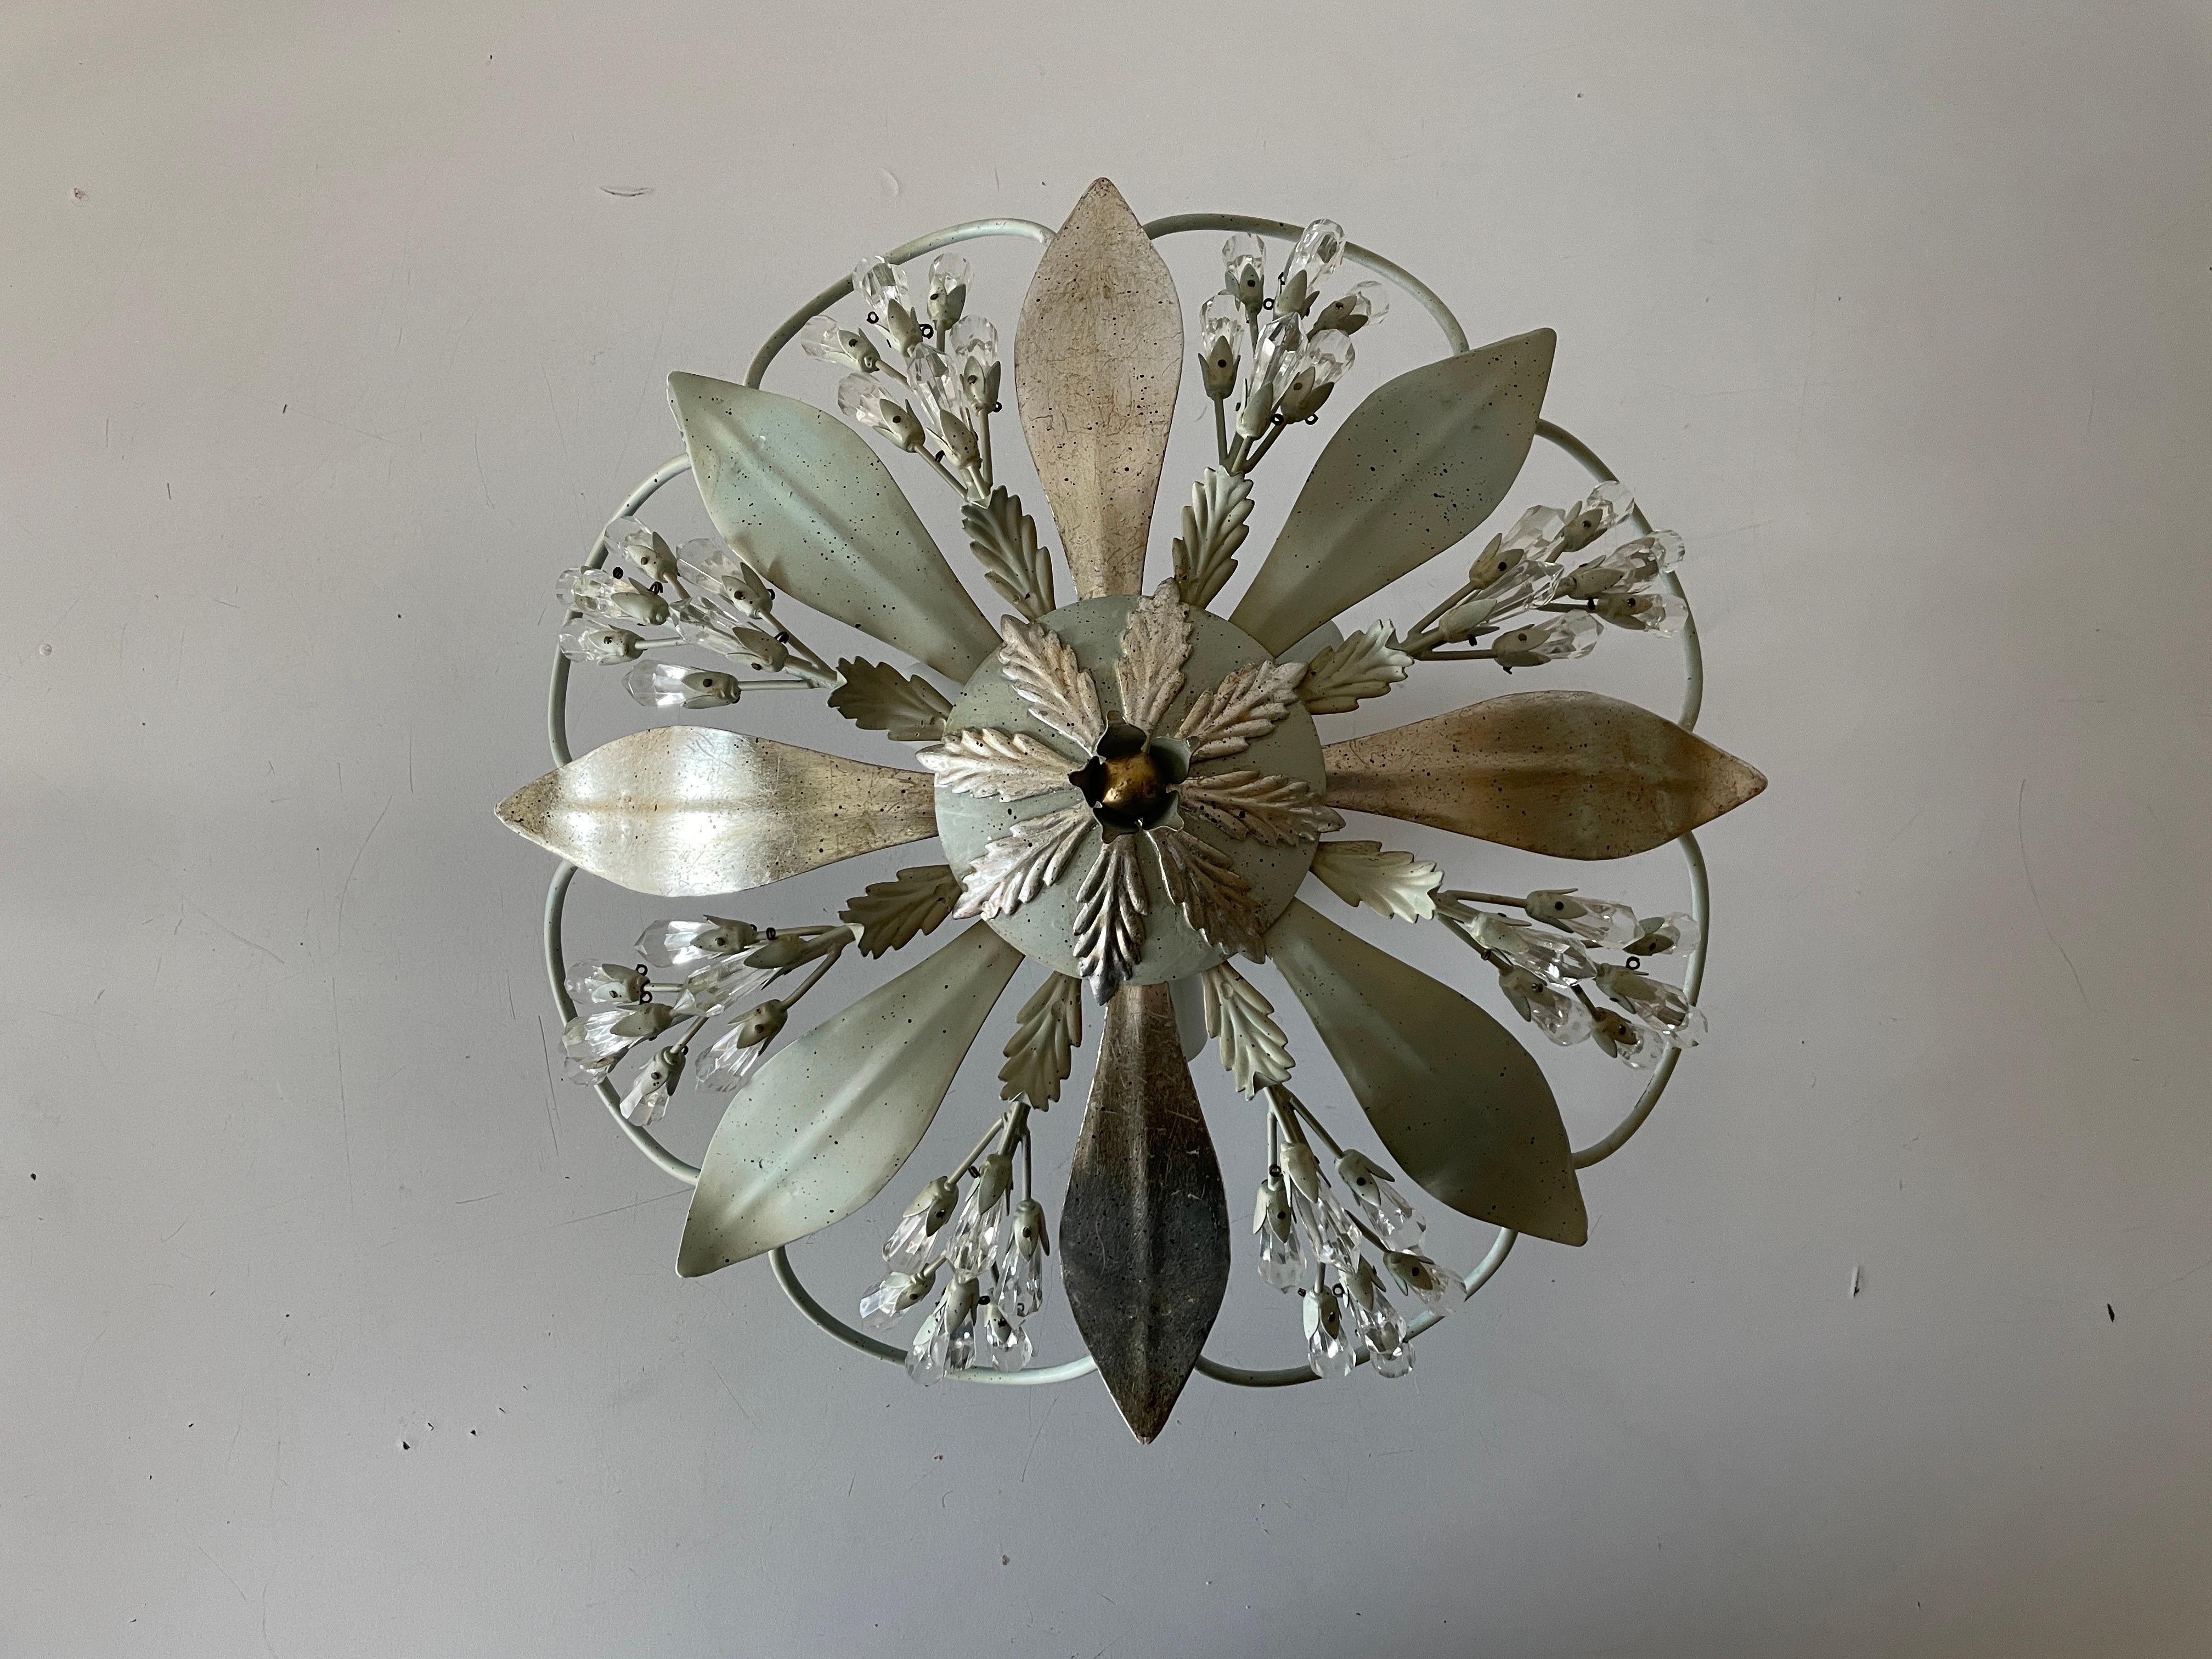 Flower Design Ceiling Lamp with Glass Ornaments, 1950s, Germany For Sale 6